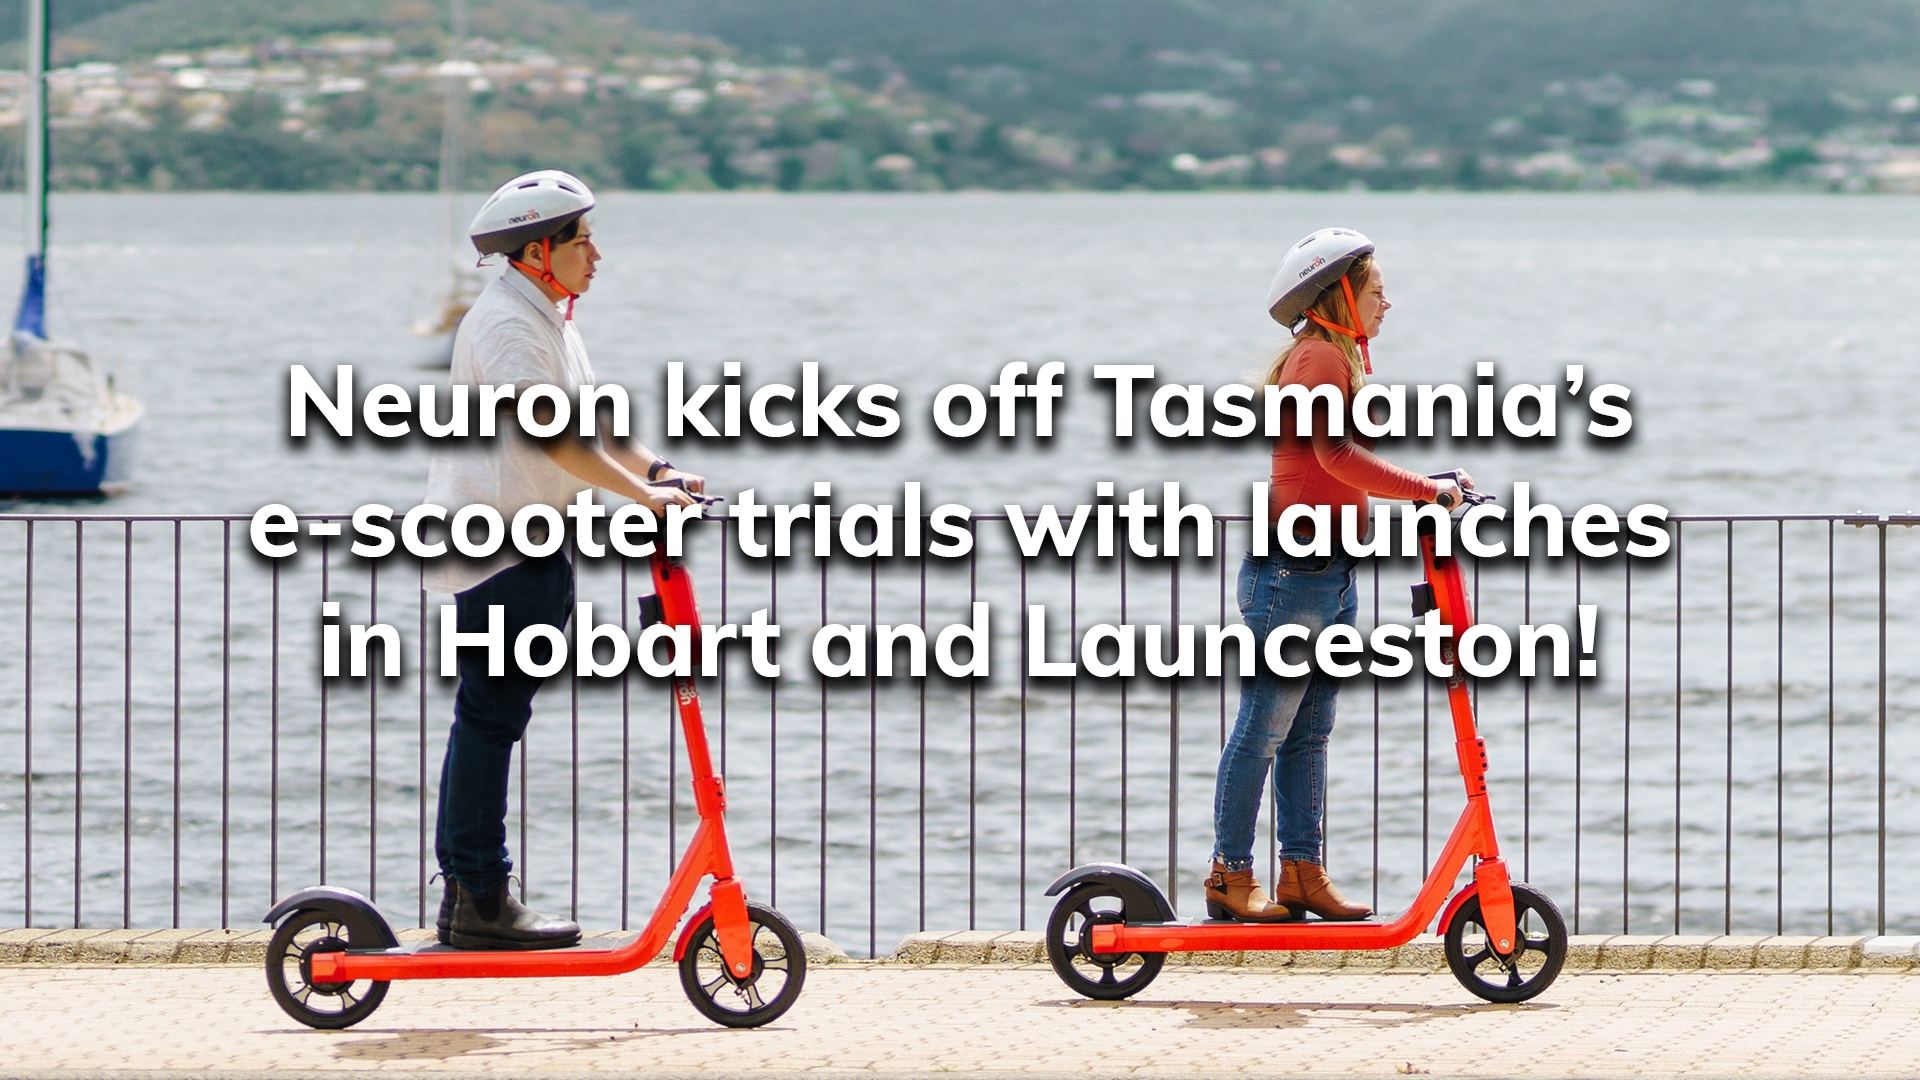 You are currently viewing Neuron kicks off Tasmania’s e-scooter trials with launches in Hobart and Launceston!